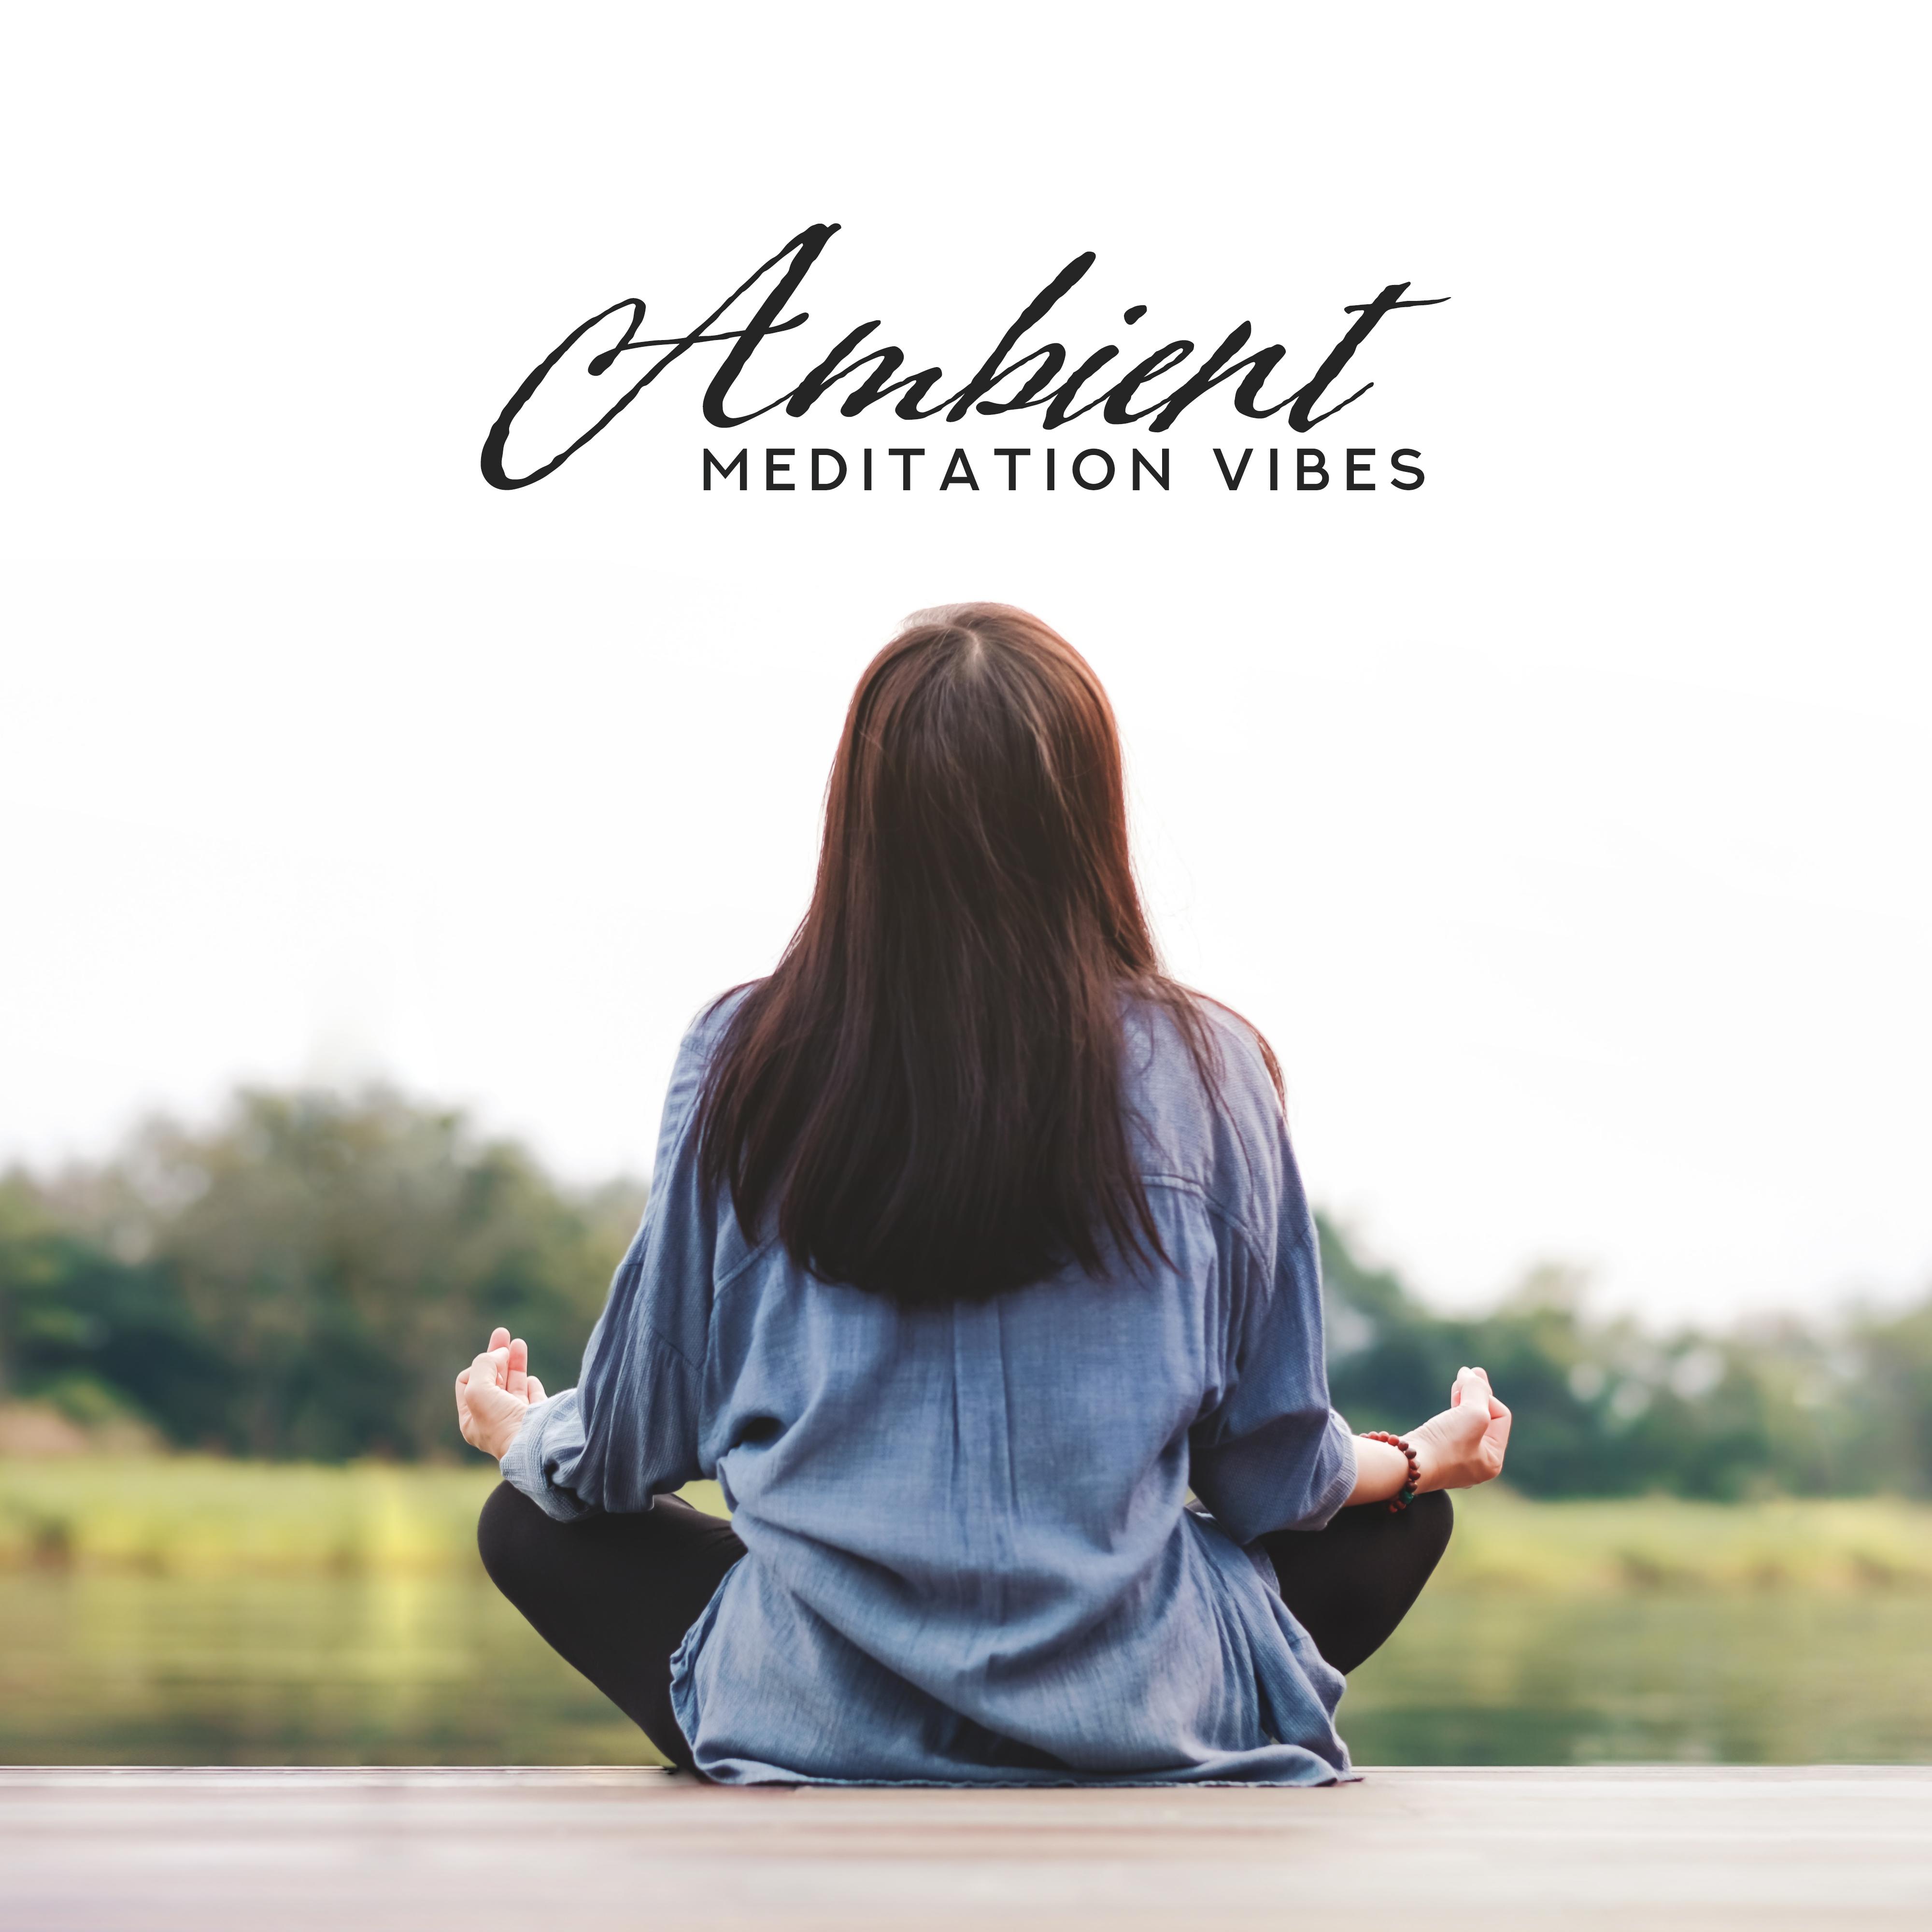 Ambient Meditation Vibes  Mindfulness Relaxation, Zen, Reiki, Reduce Stress, Calming Meditation Mix, Ambient Yoga, Inner Harmony